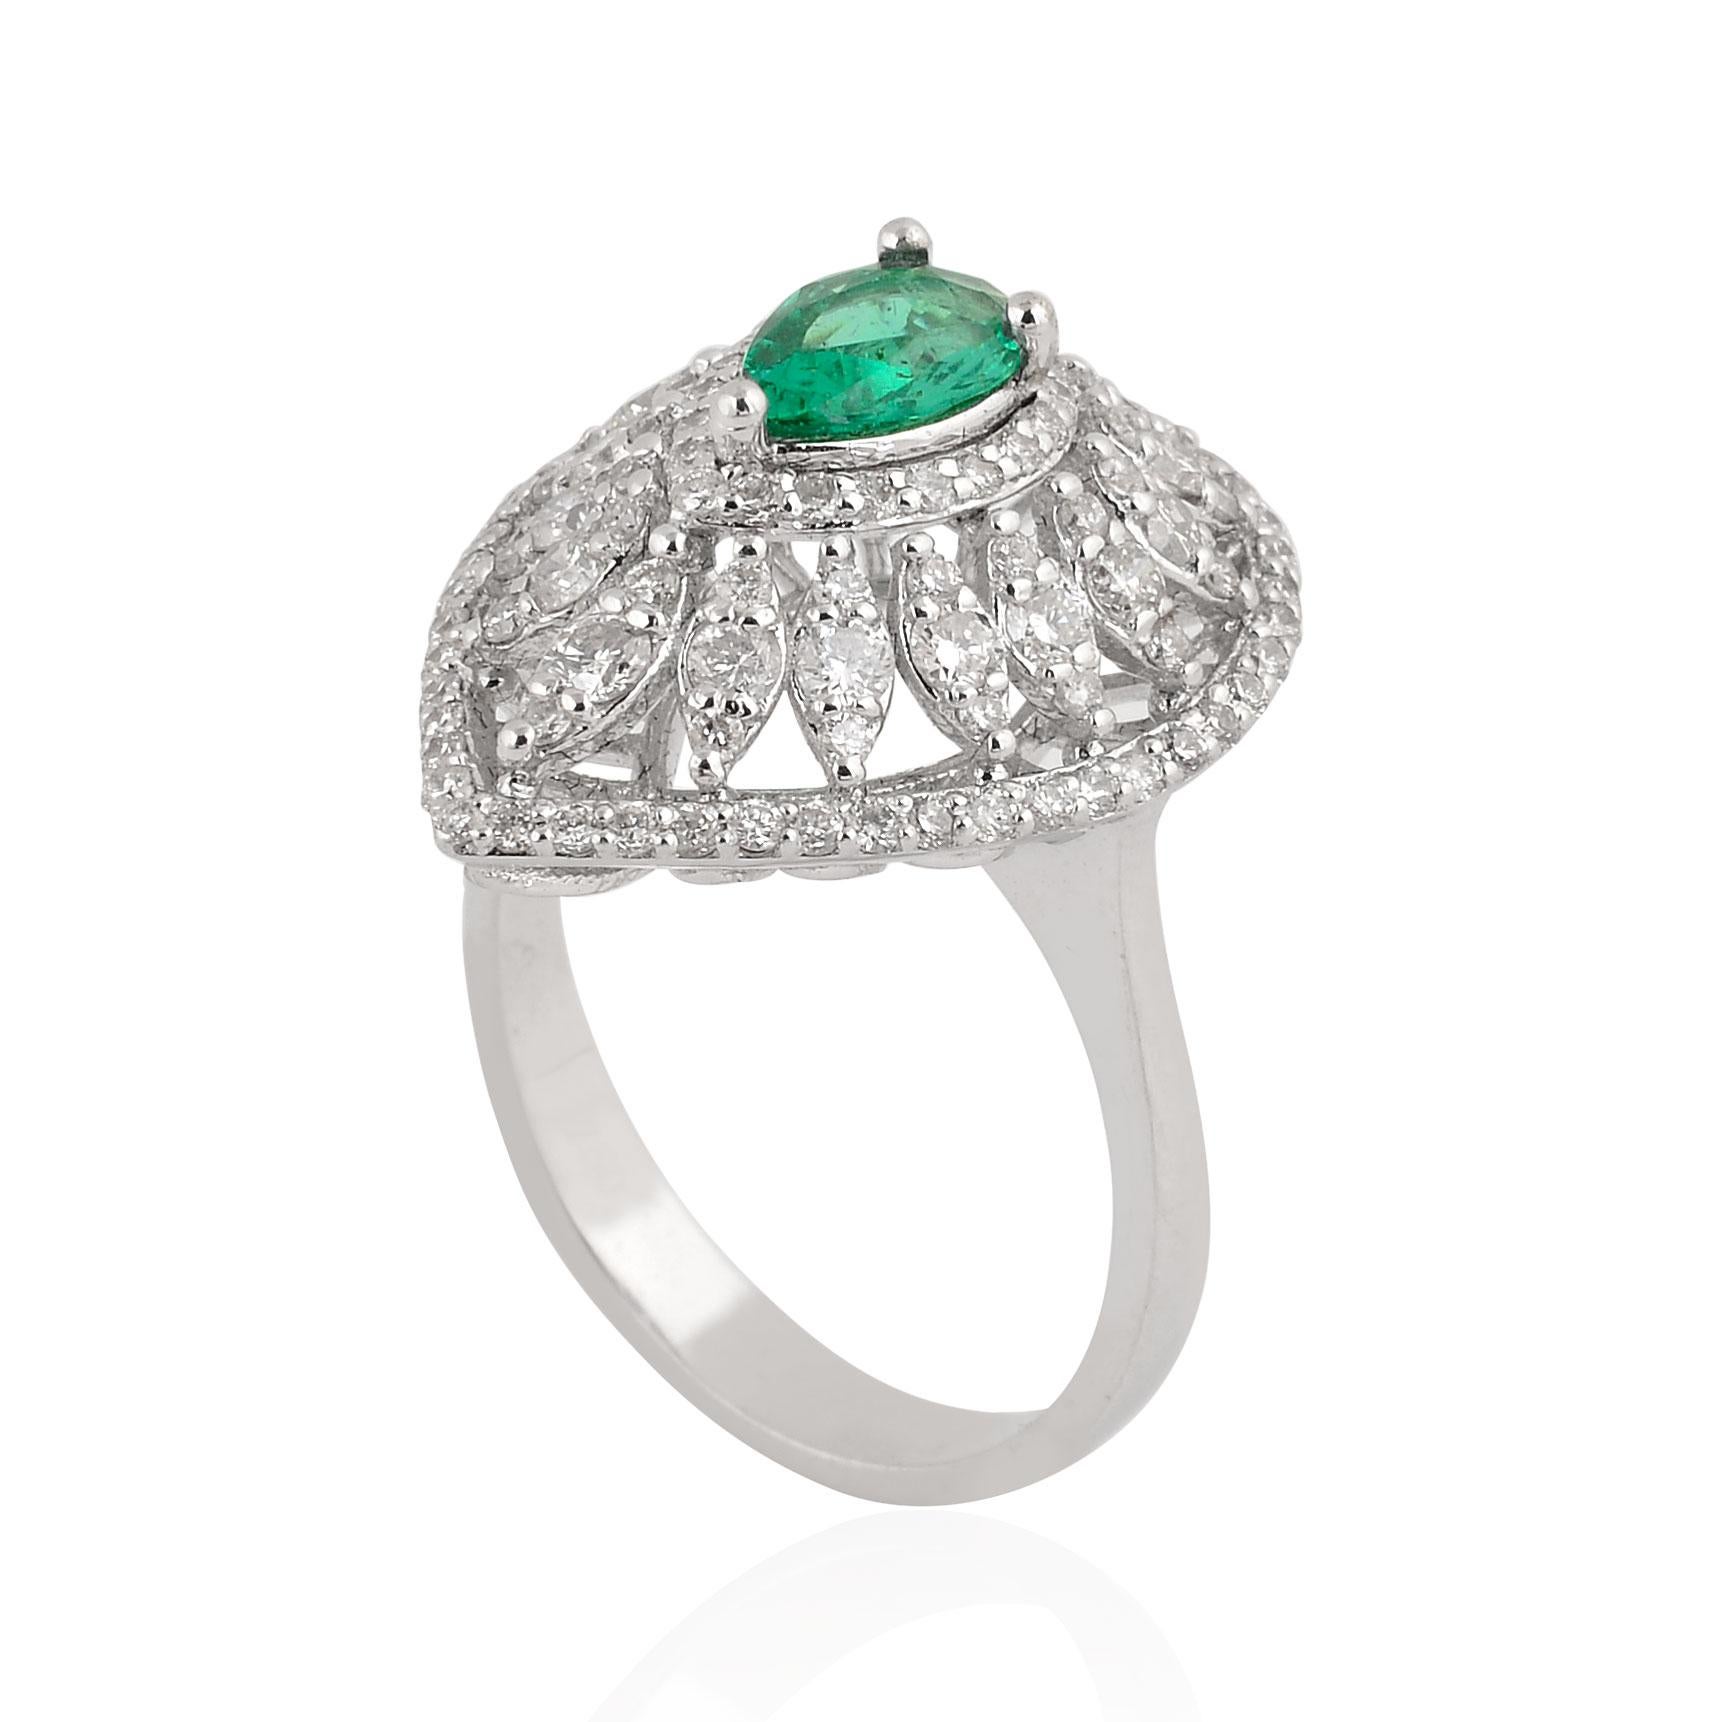 Modern Real Pear Zambian Emerald Gemstone Cocktail Ring Diamond 14k White Gold Jewelry For Sale